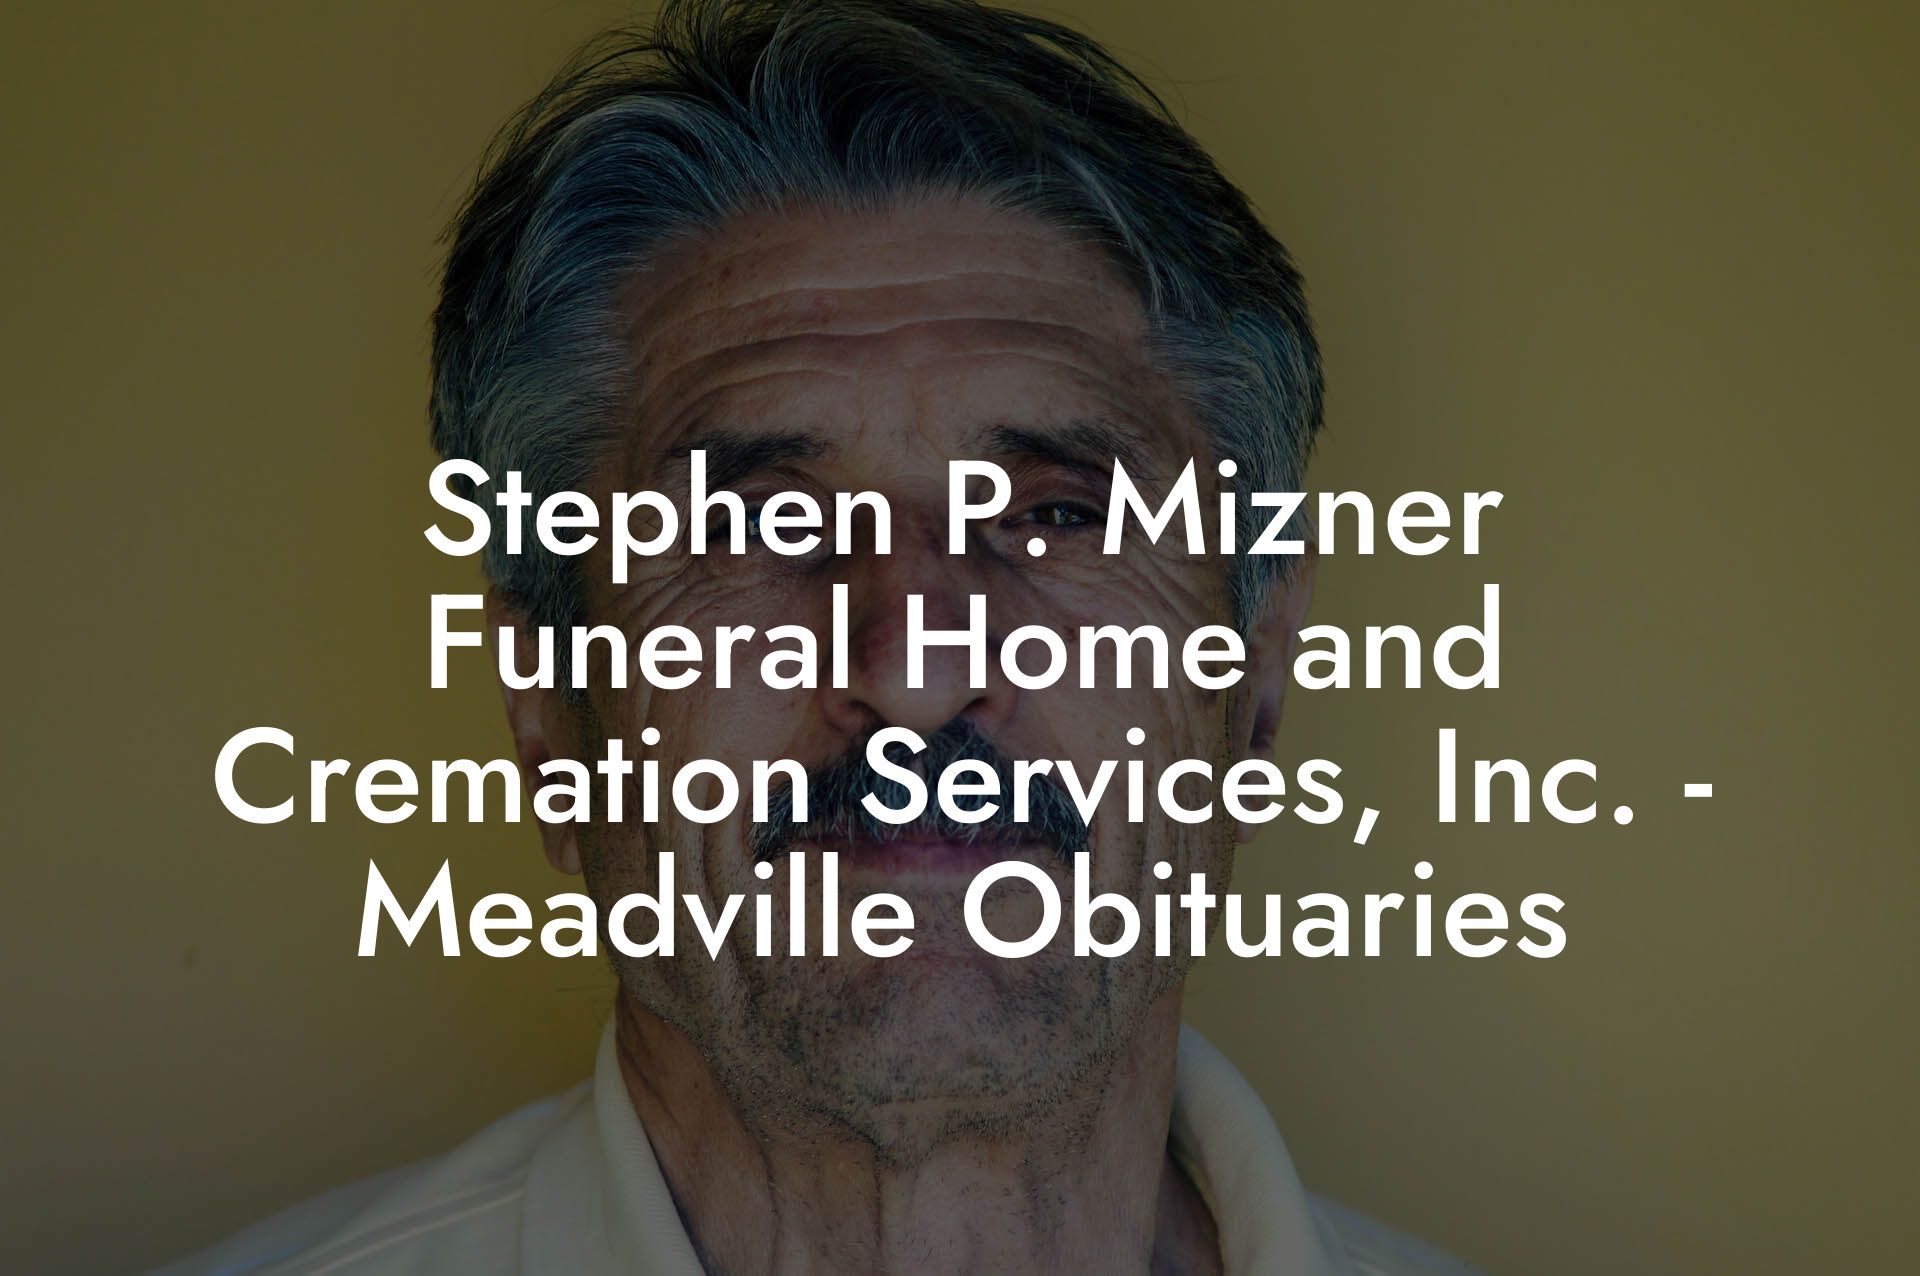 Stephen P. Mizner Funeral Home and Cremation Services, Inc. - Meadville Obituaries